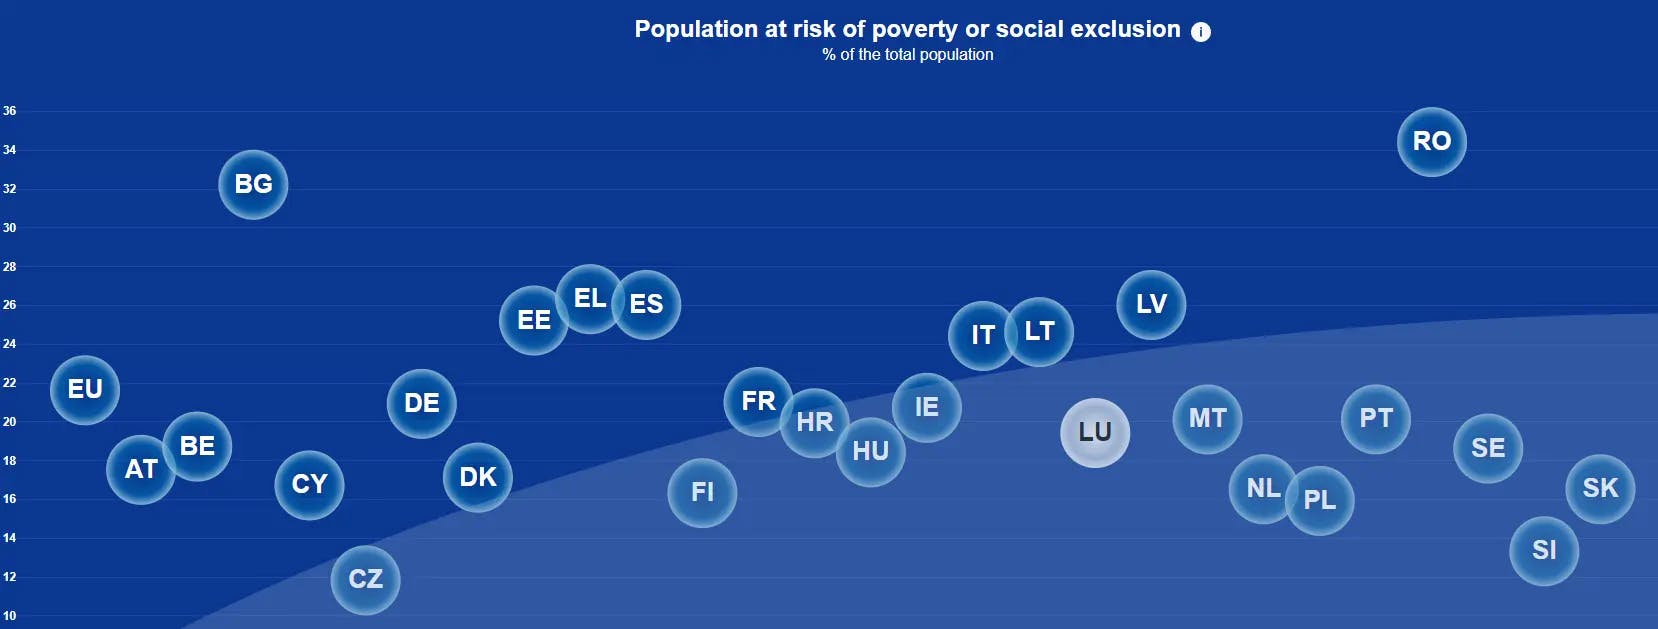 Population at risk of poverty